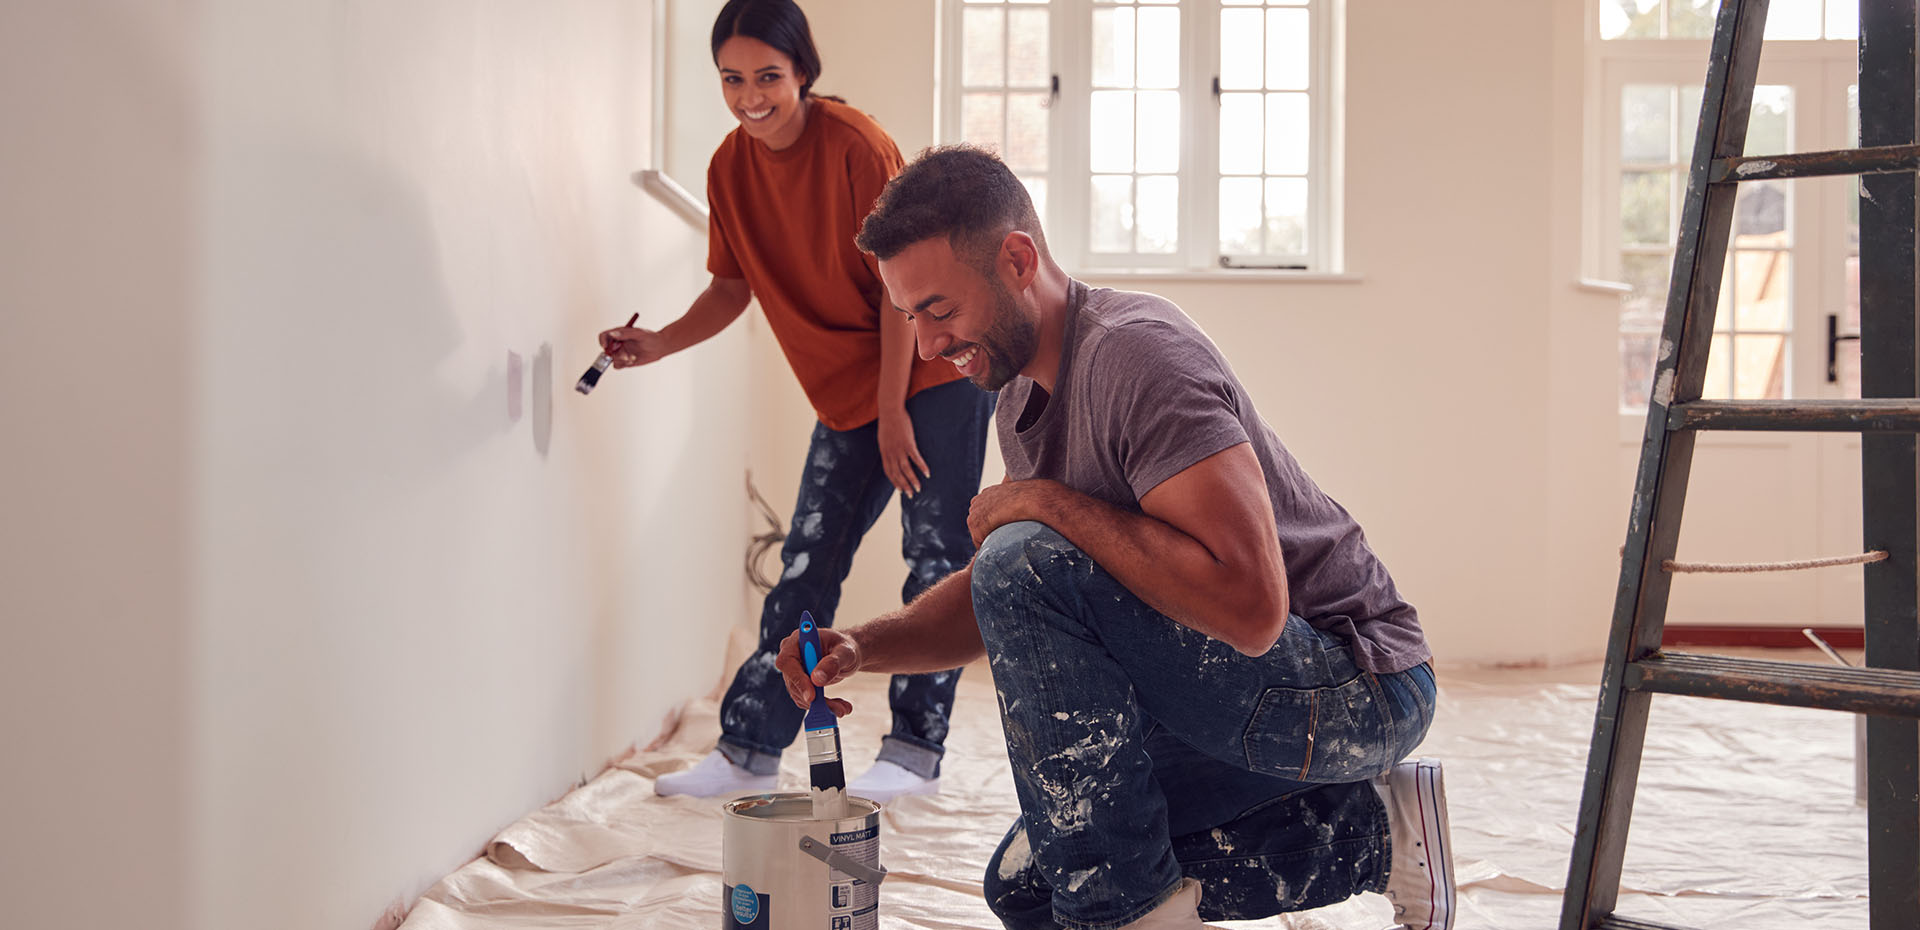 Image showing a happy couple painting samples on the wall